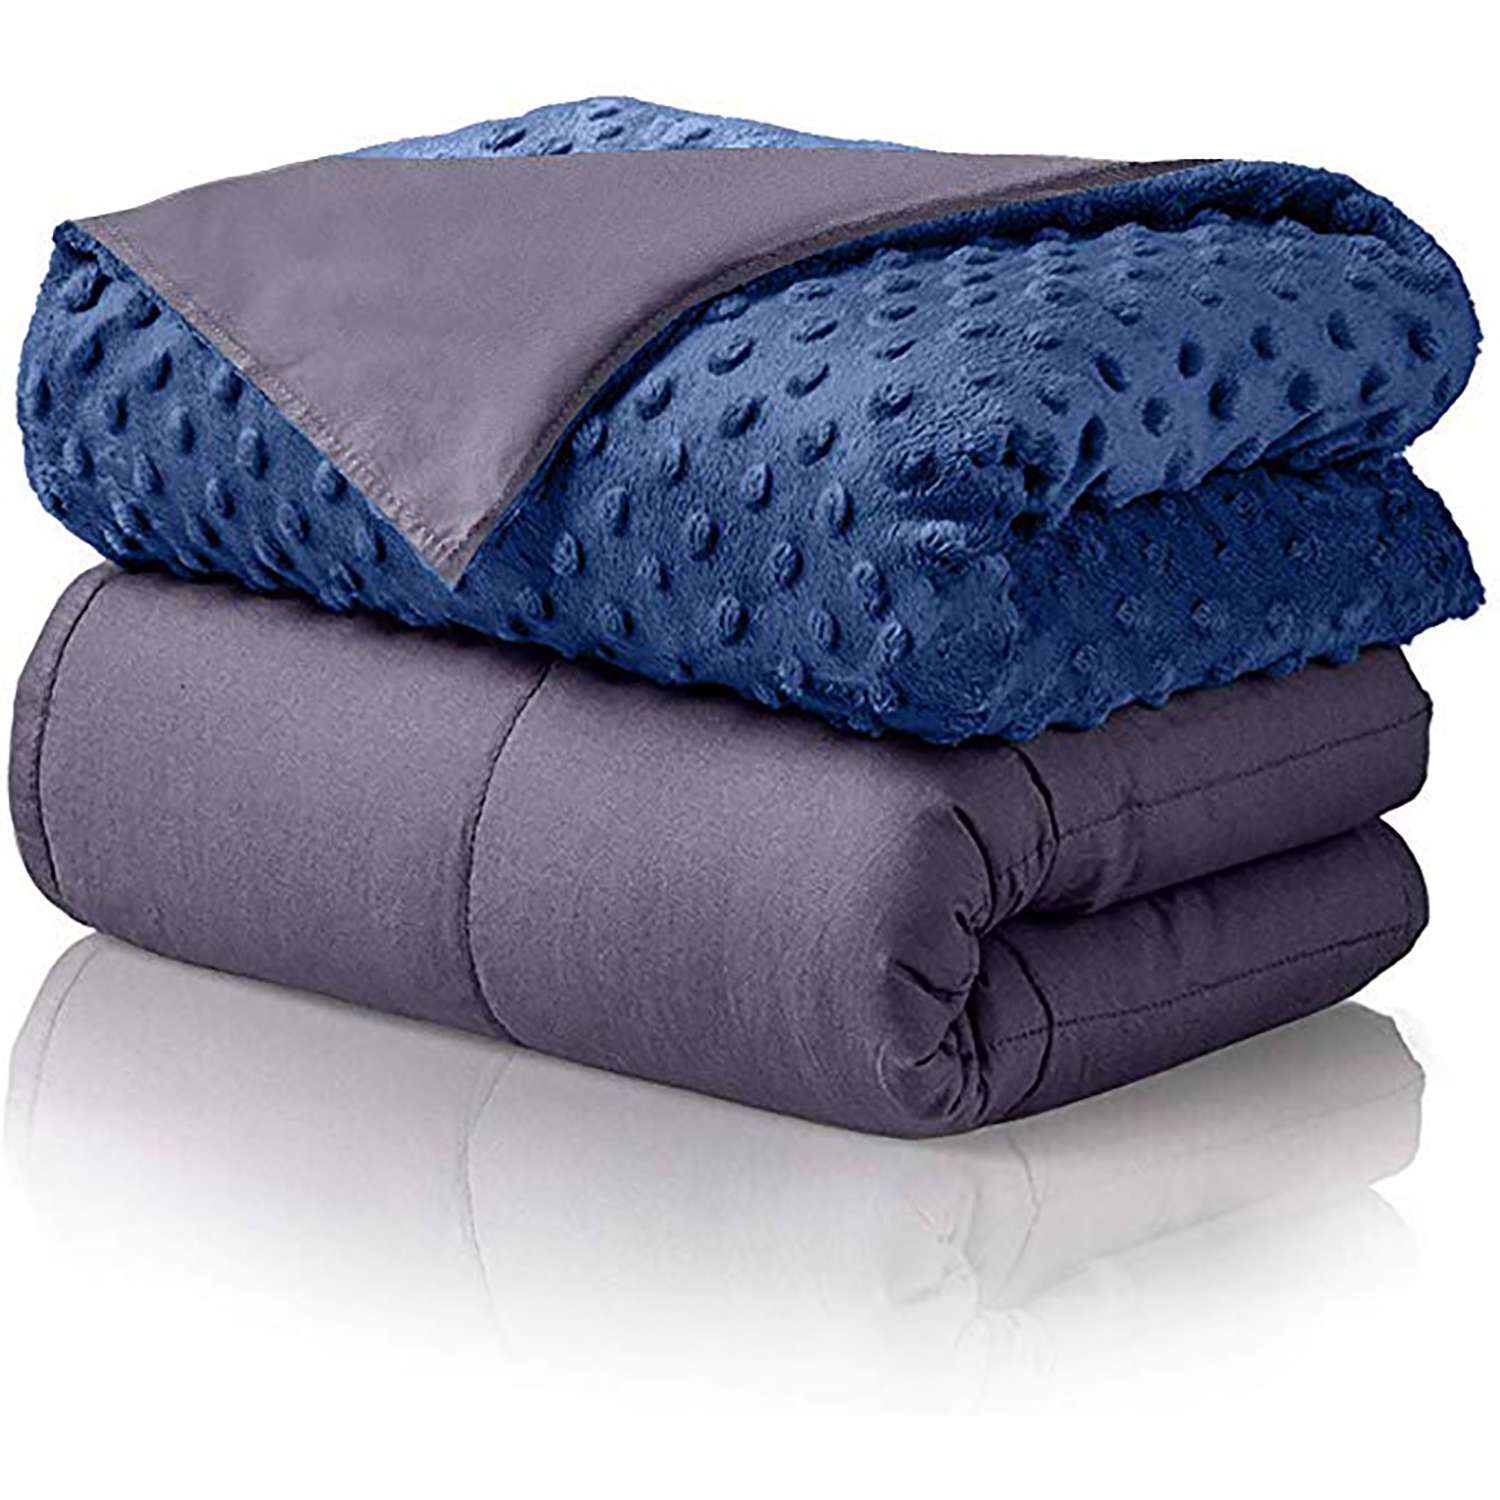 The Best Cooling Weighted Blankets for Hot Sleepers | Shape